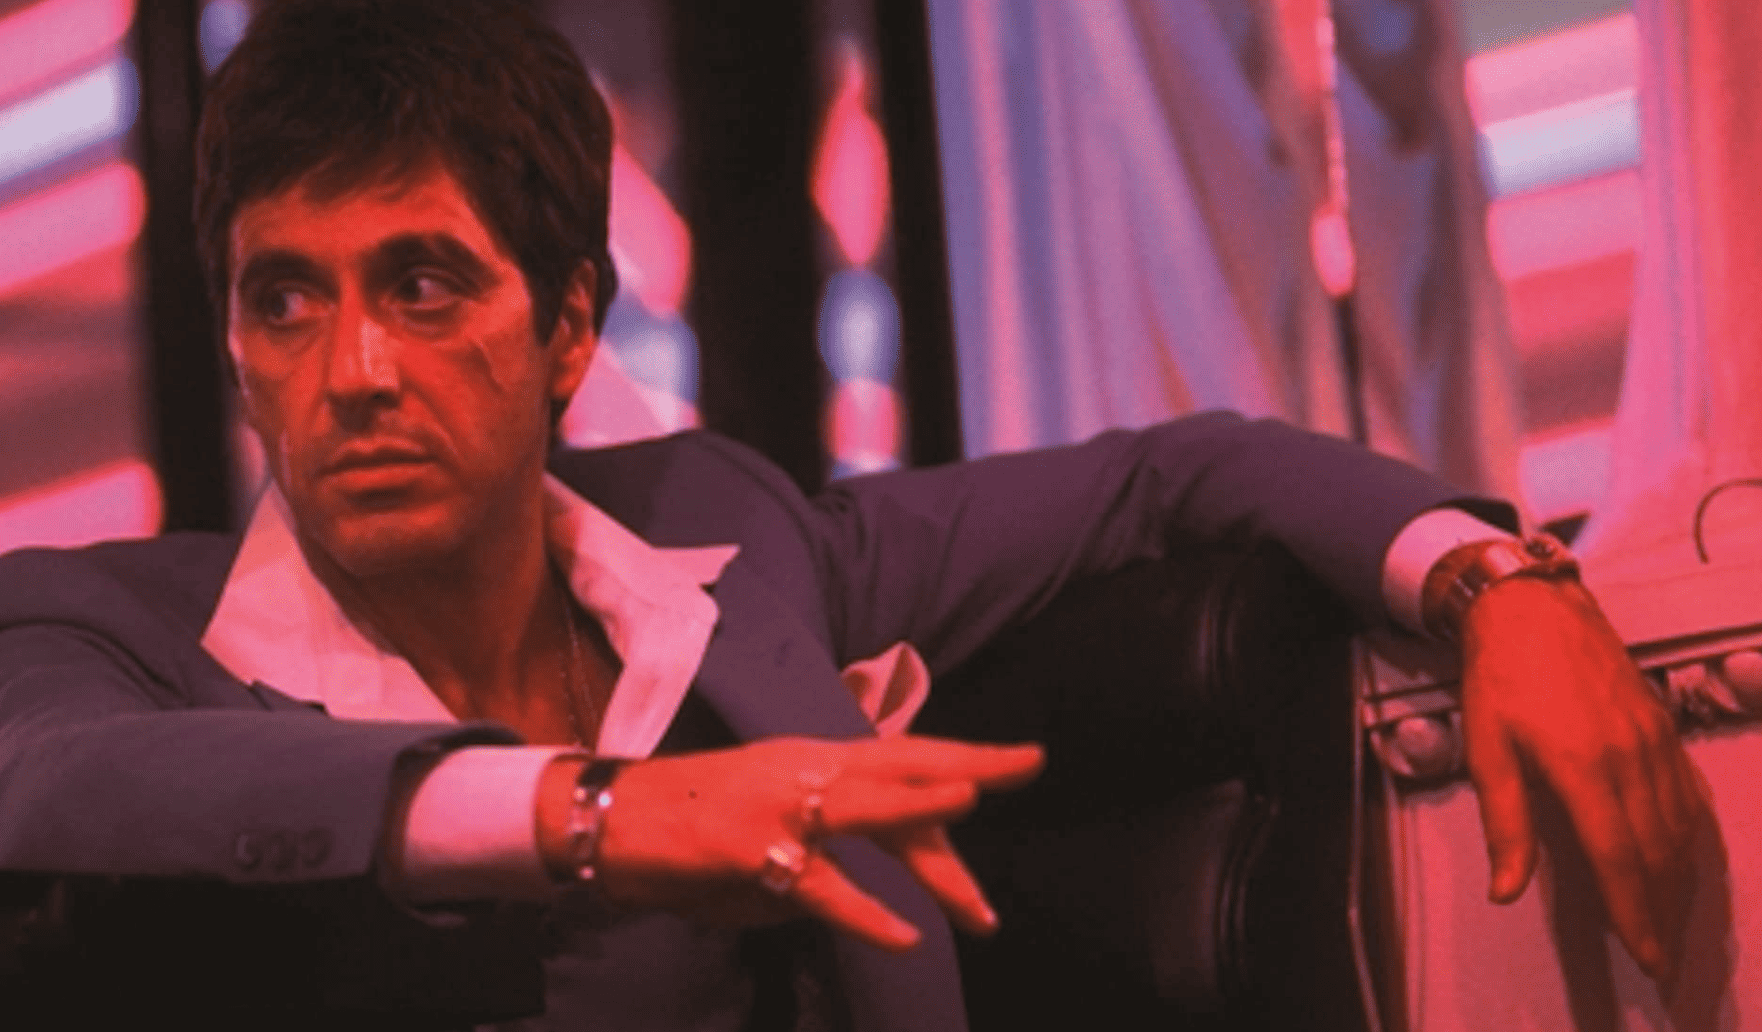 Al Pacino sitting at a club wearing heavy rings on his fingers and holding a cigar in this image from Universal Pictures